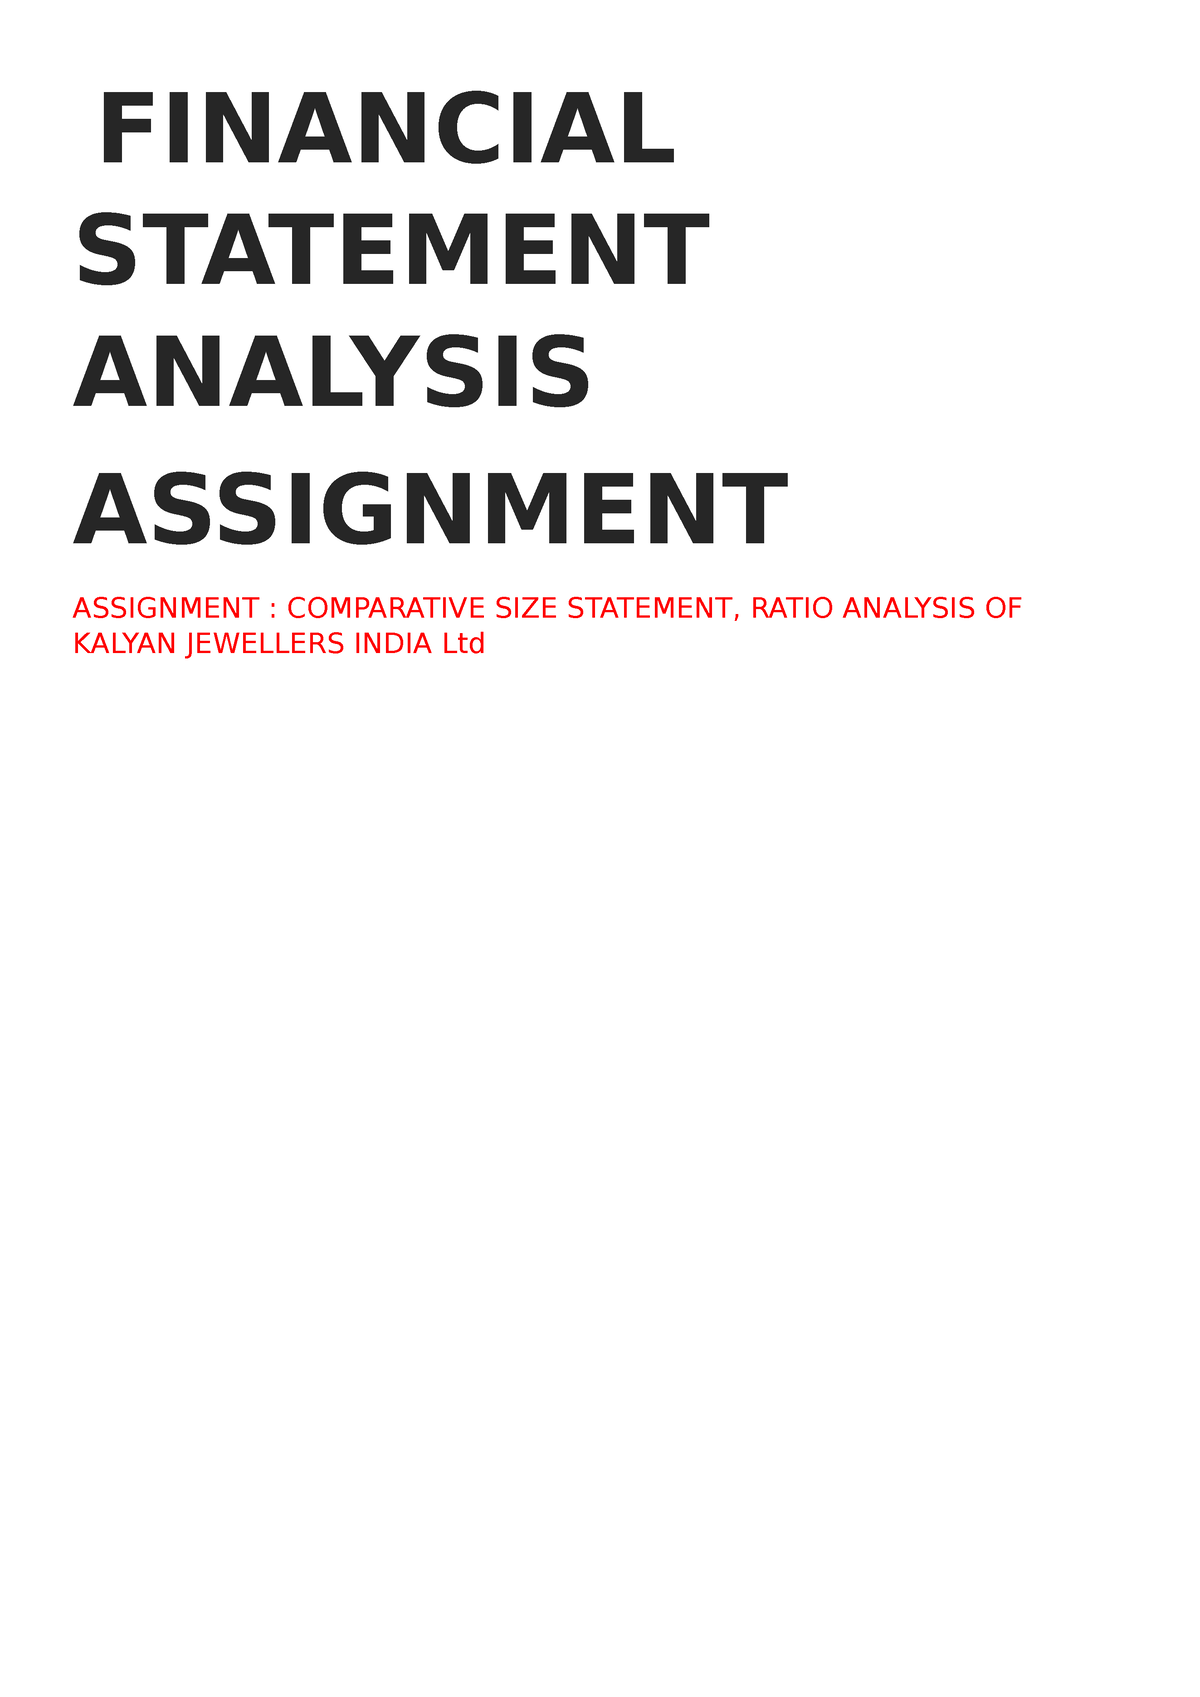 company financial statement analysis assignment